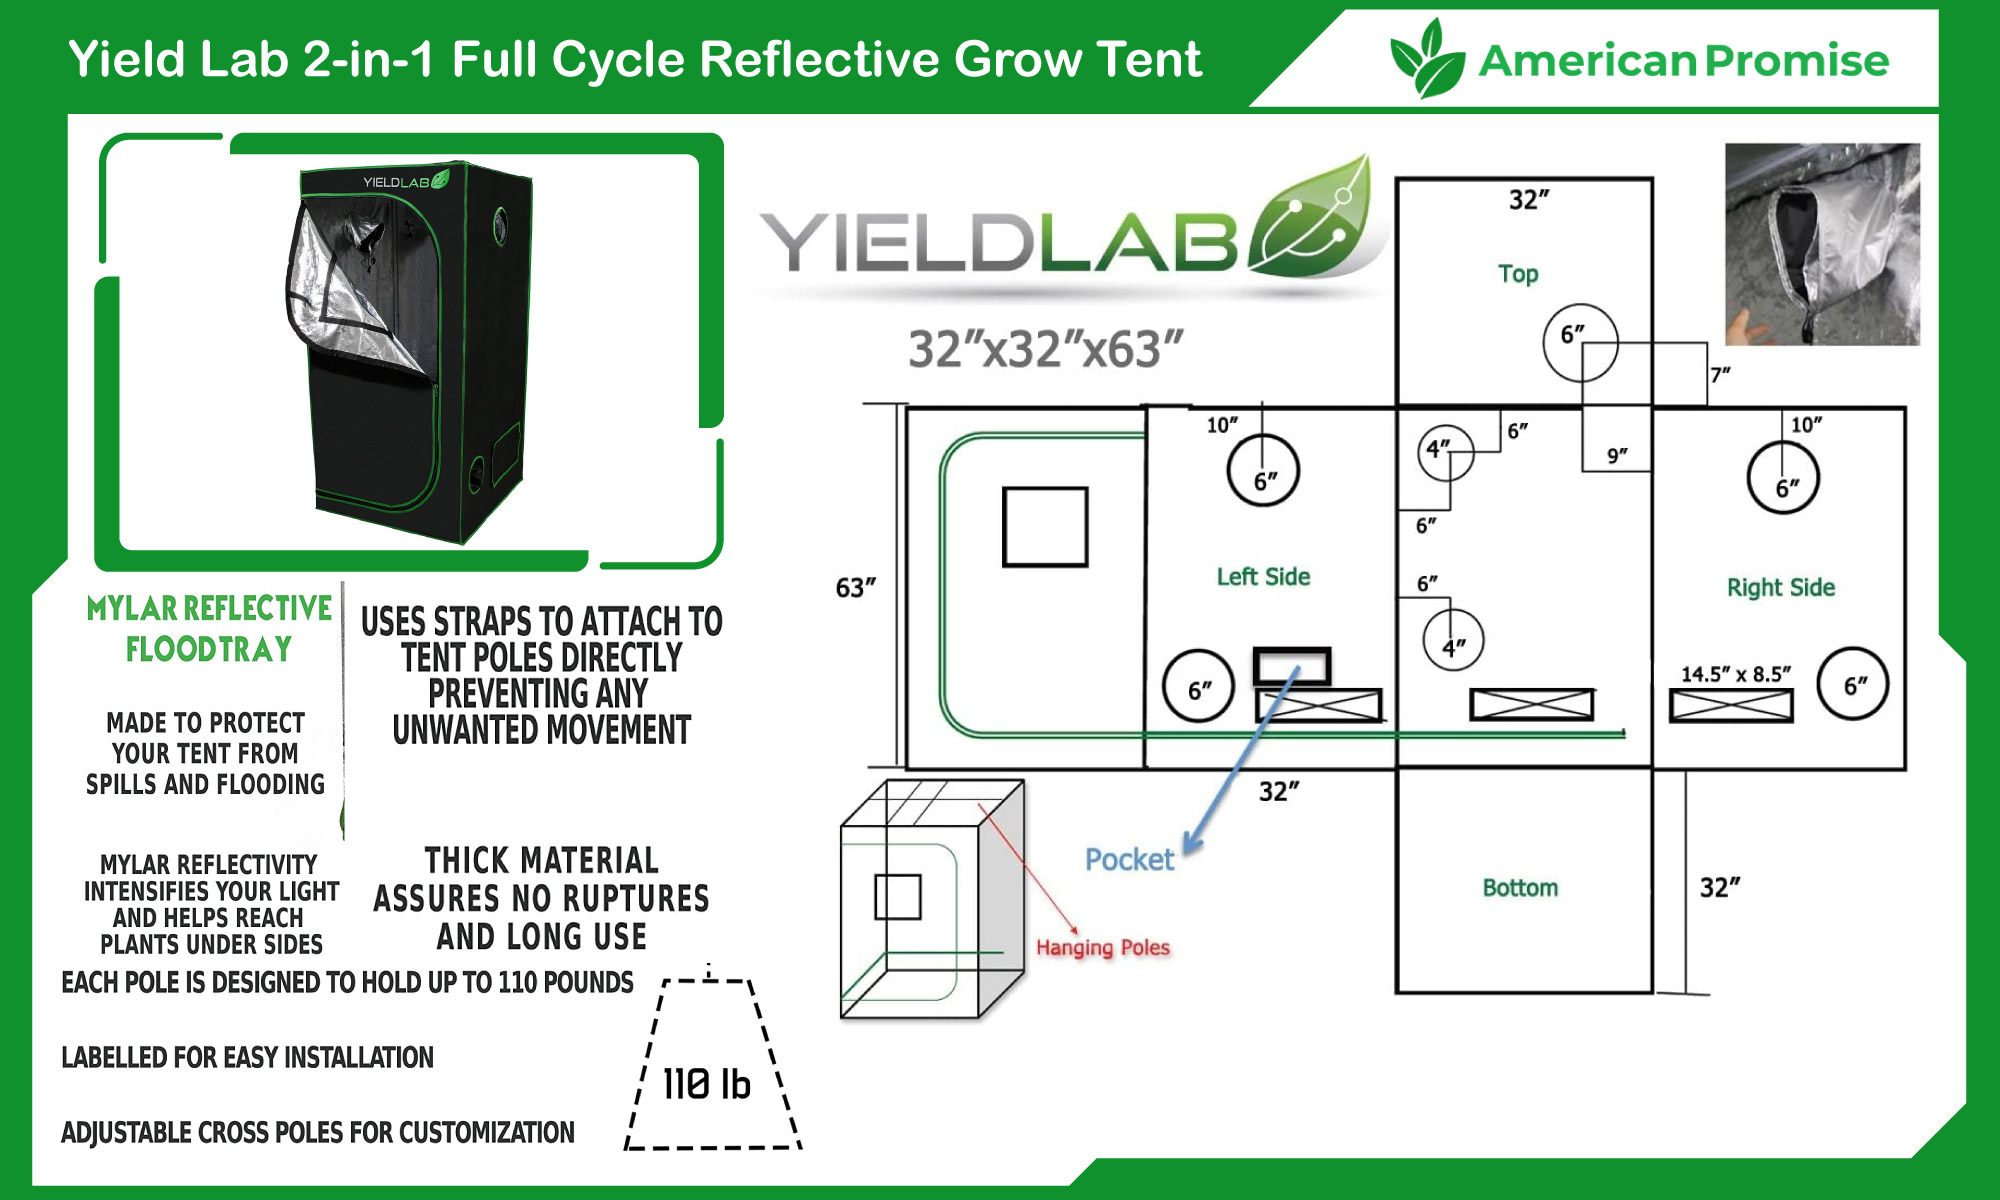 Yield Lab 2-in-1 Full Cycle Reflective Grow Tent